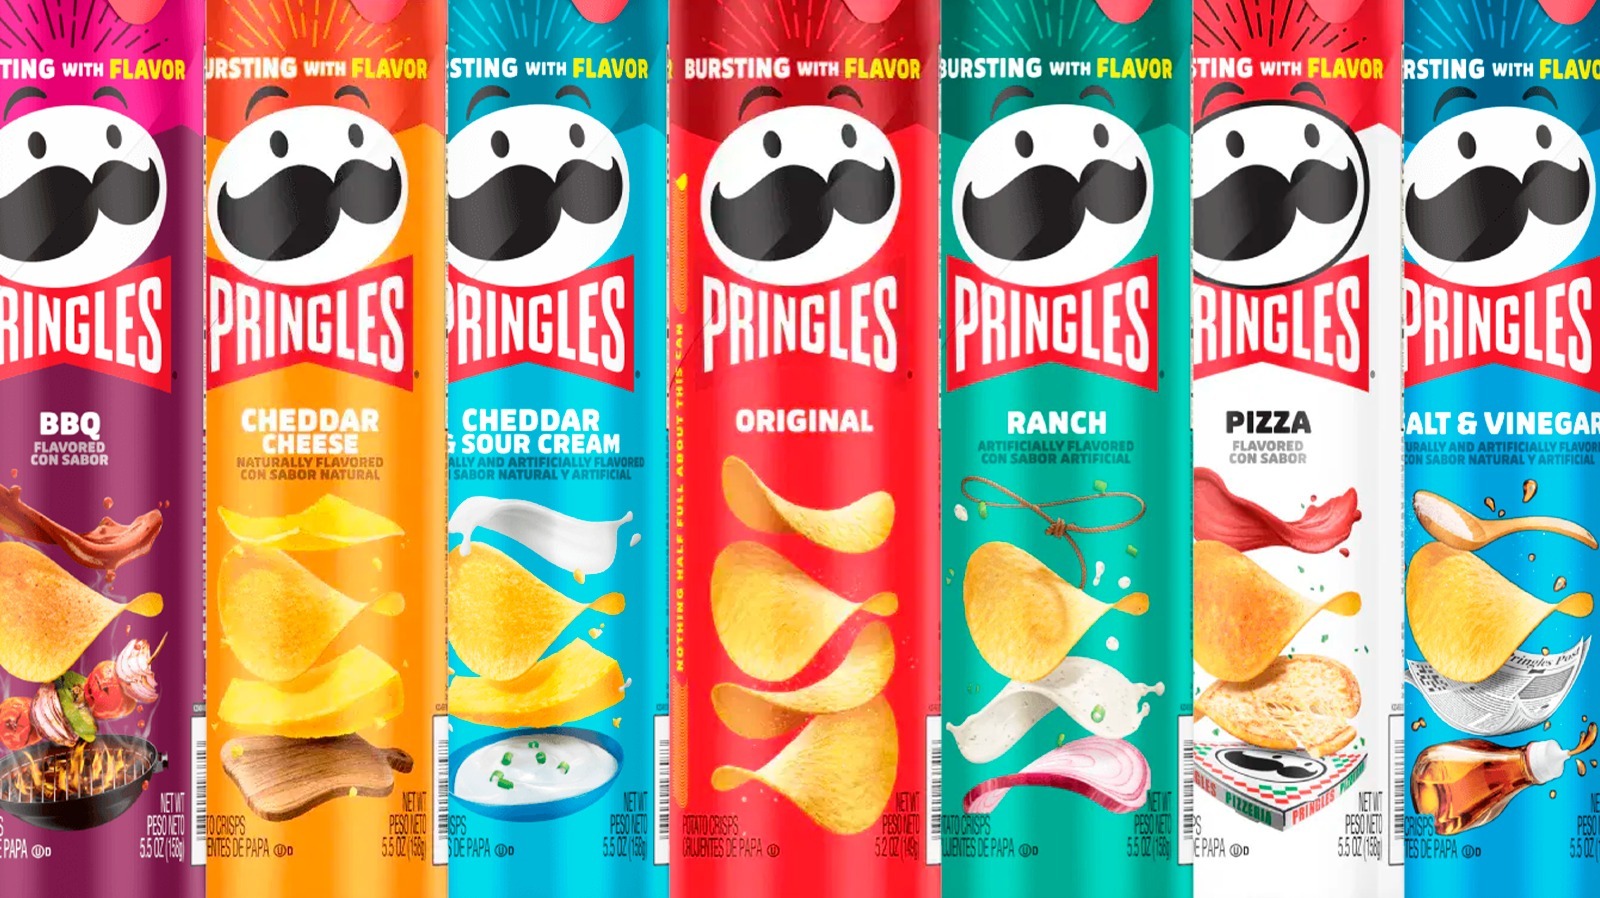 Ranking The Most Popular Pringles Flavors So You Don't Have To The